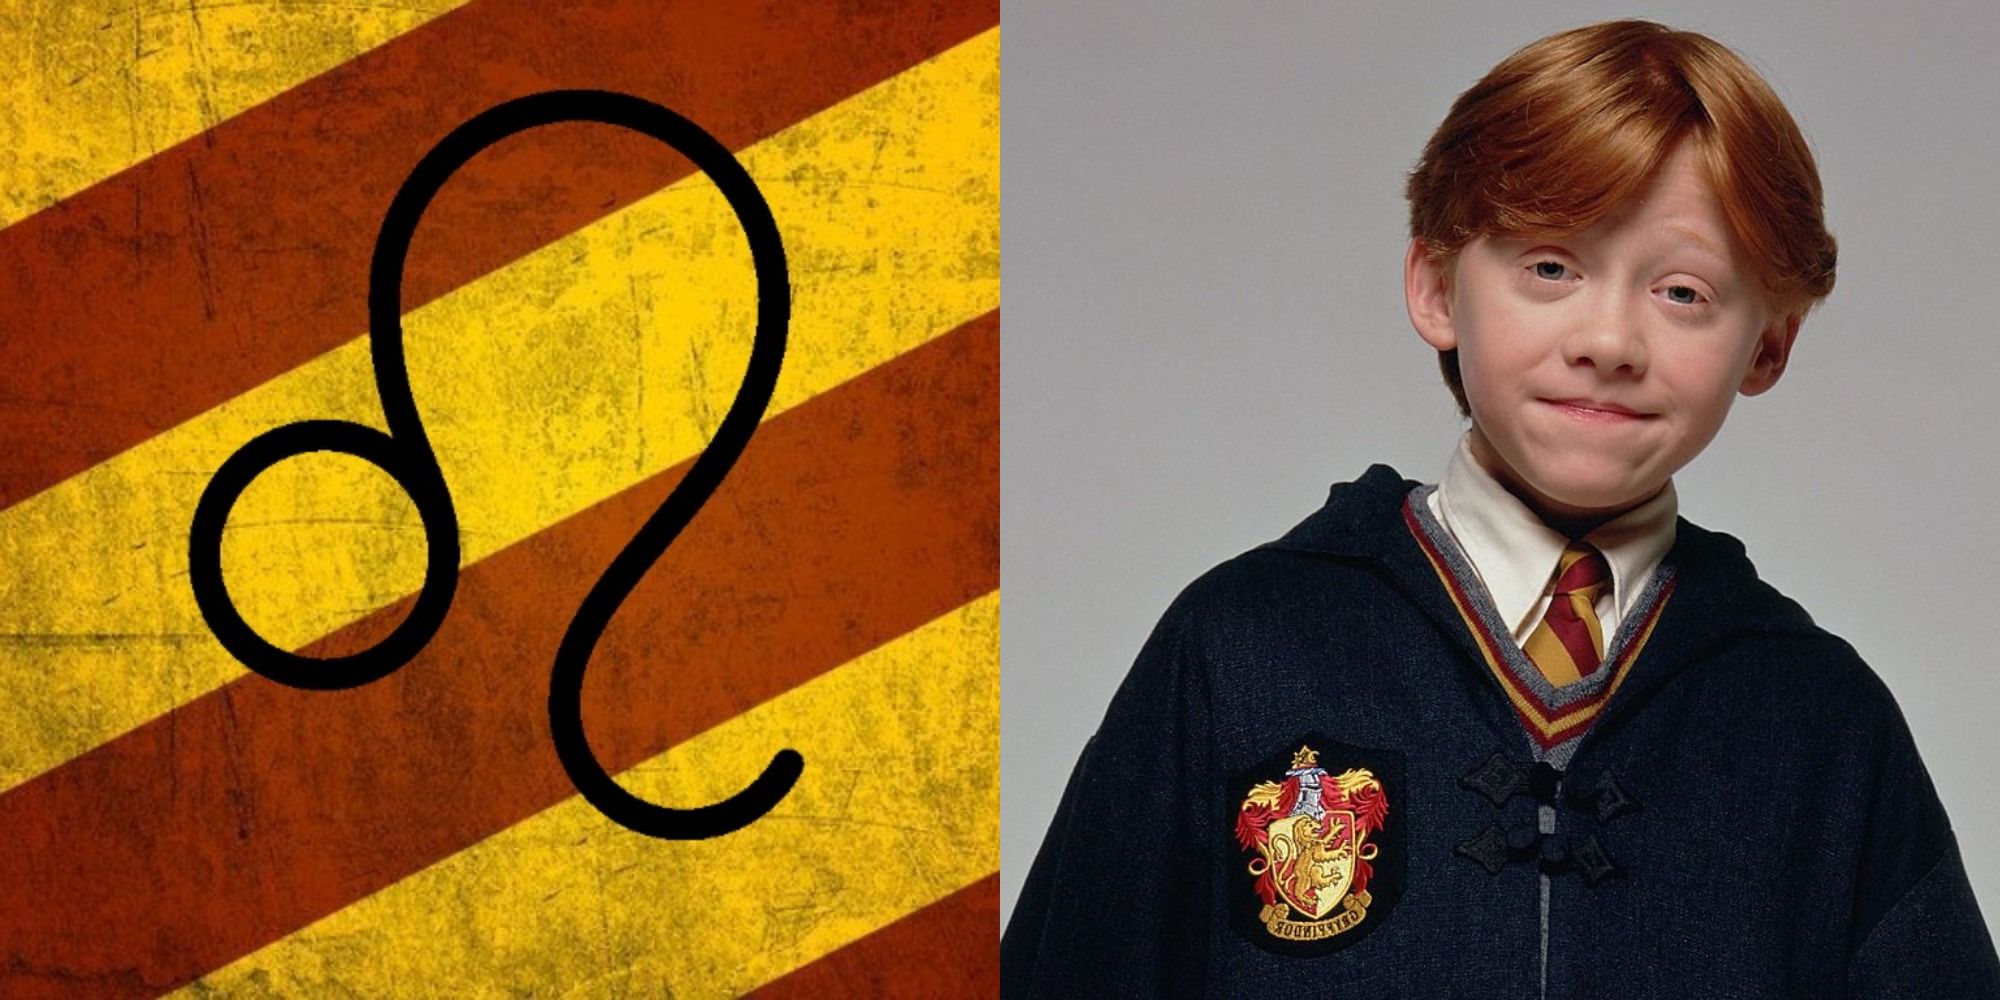 Leo Symbol over red and yellow stripes next to Ron Weasley in a Gryffindor uniform